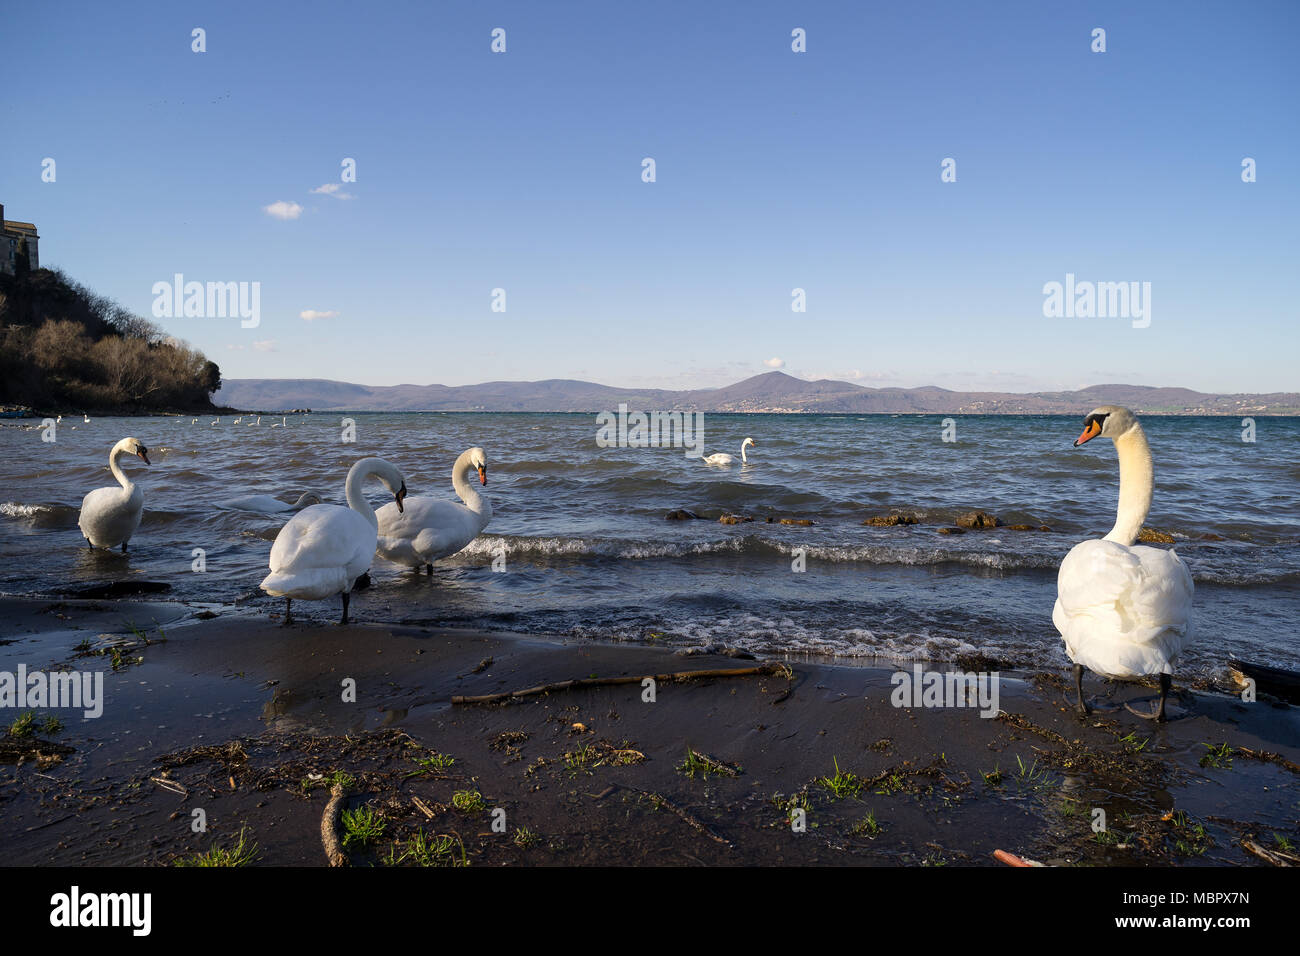 Bracciano lake, Anguillara Sabazia, Rome, Italy, 02/10/2018:a group of swans photographed on the shores of Lake Bracciano in Anguillara Sabazia, Rome. Stock Photo